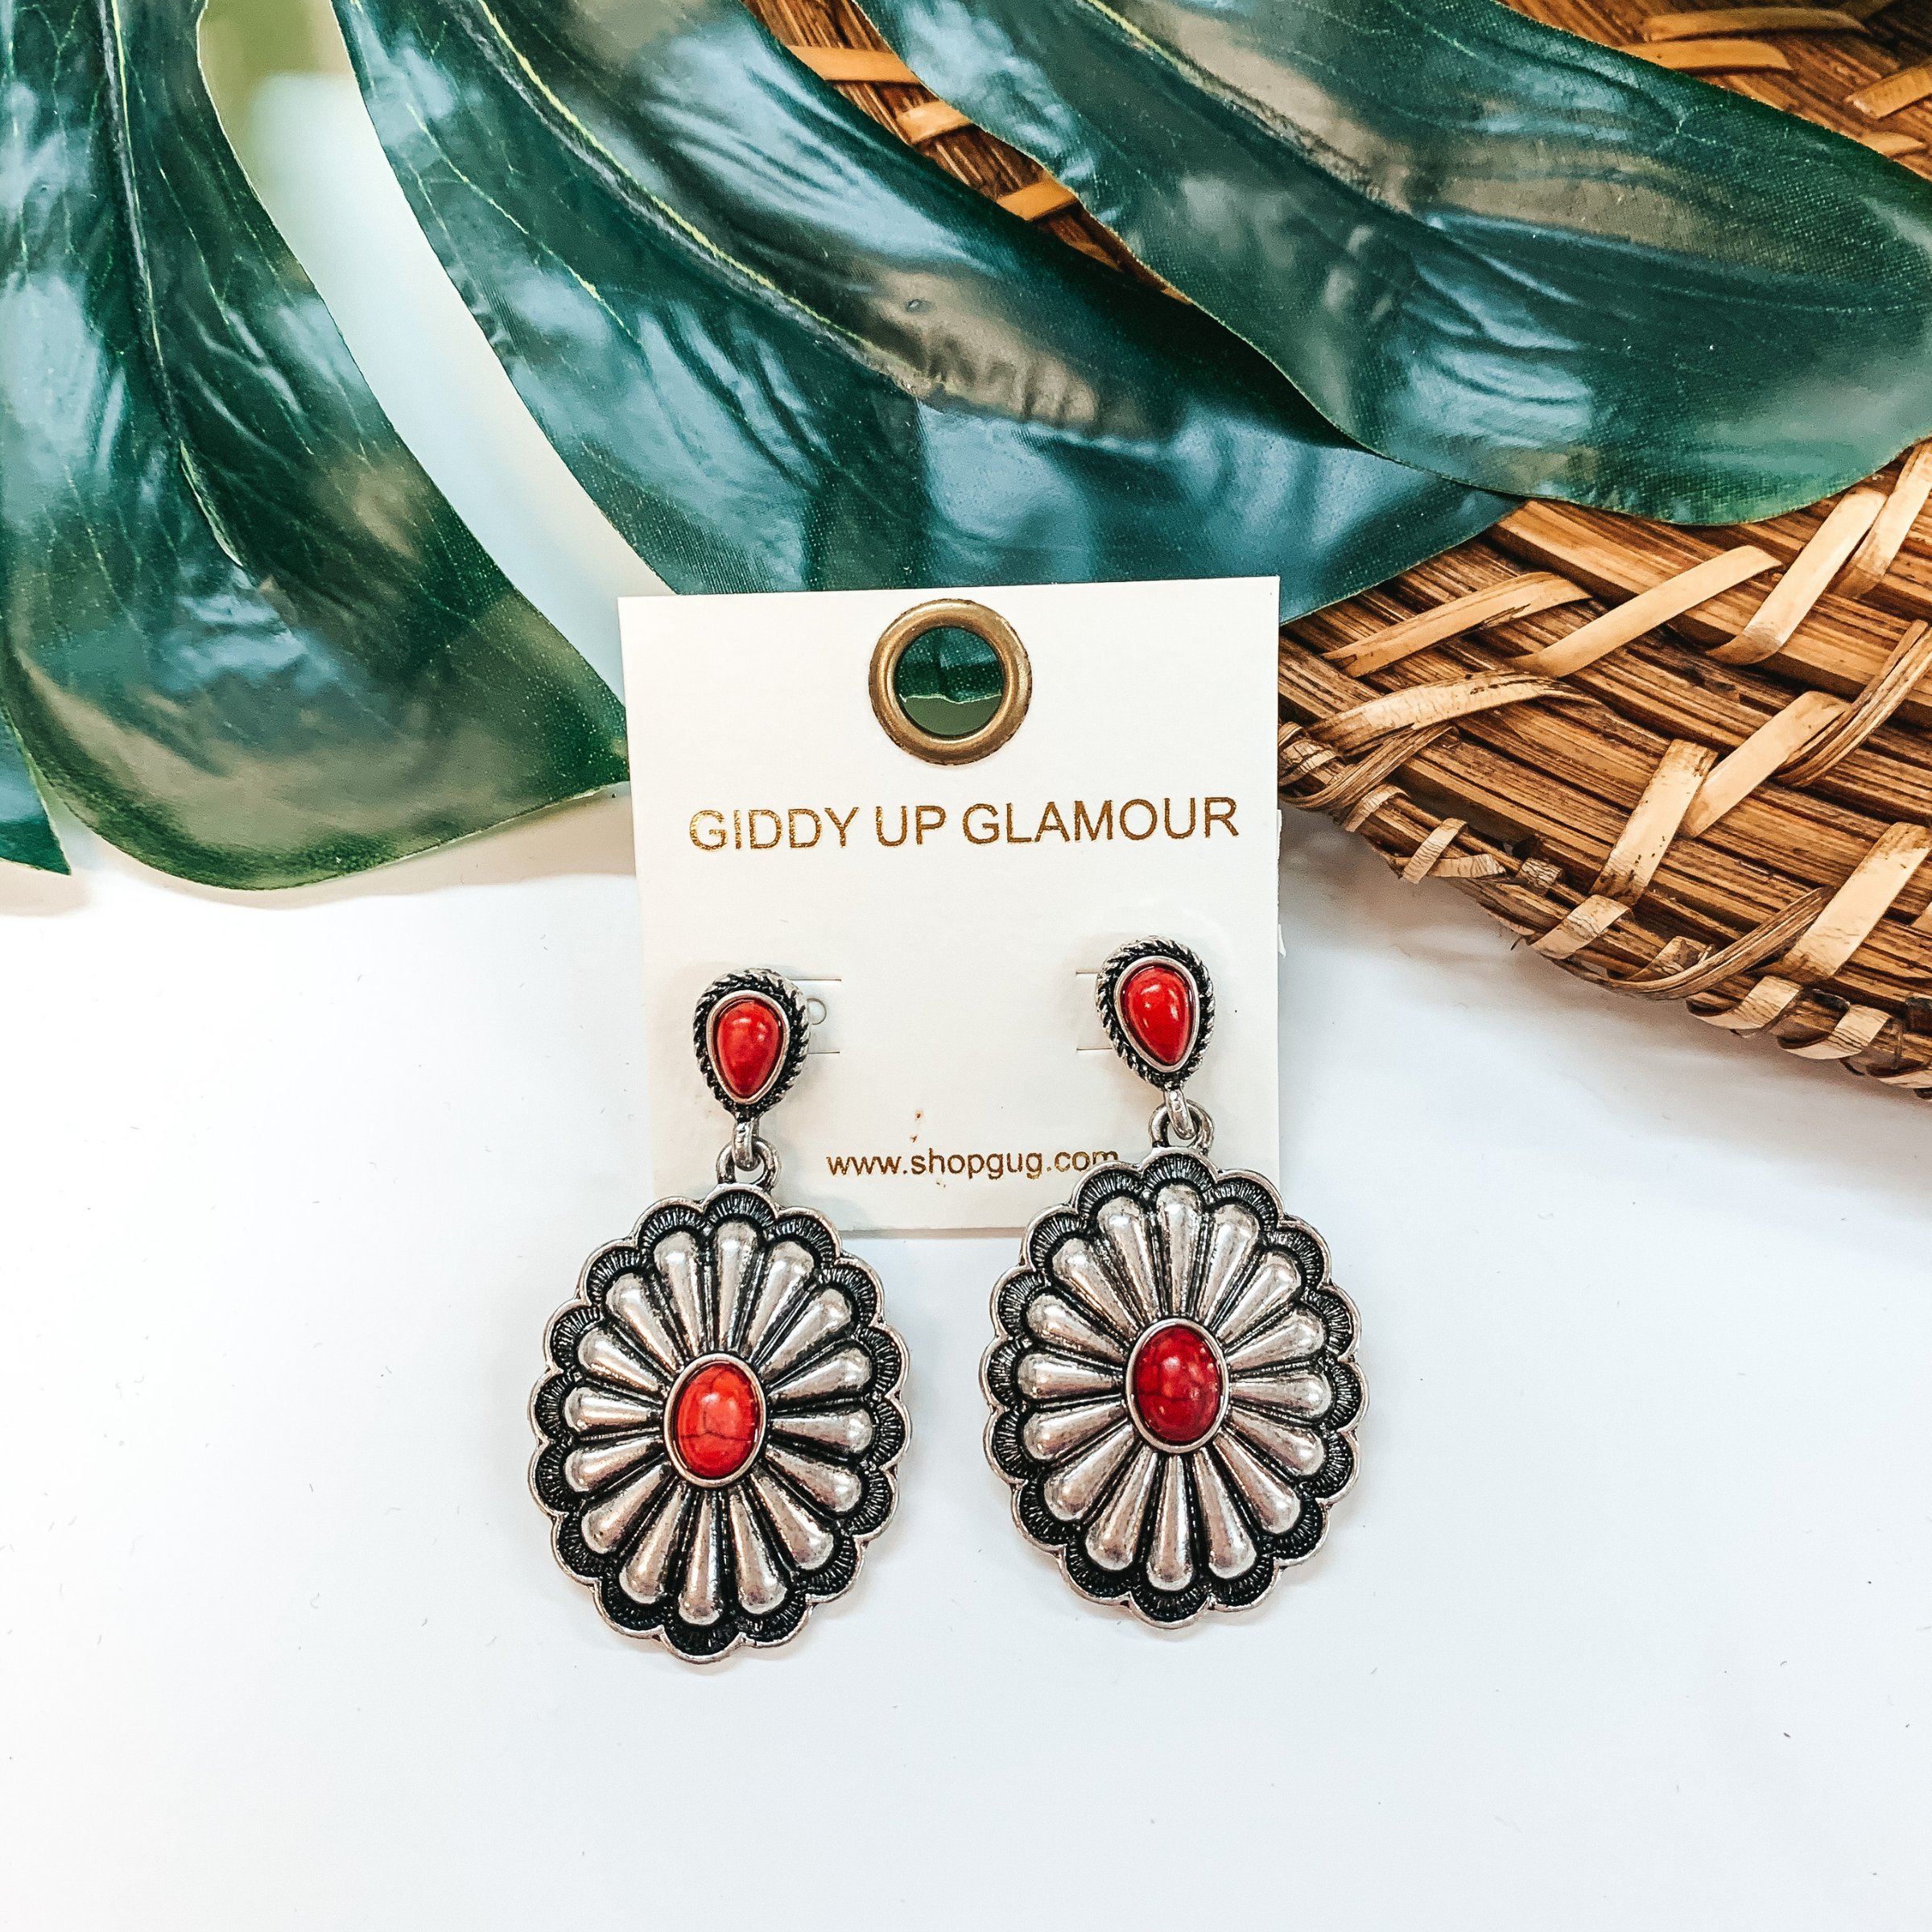 A pair of silver concho earrings with red stones. These earrings are pictured on a white background with a basket and palm leaf.